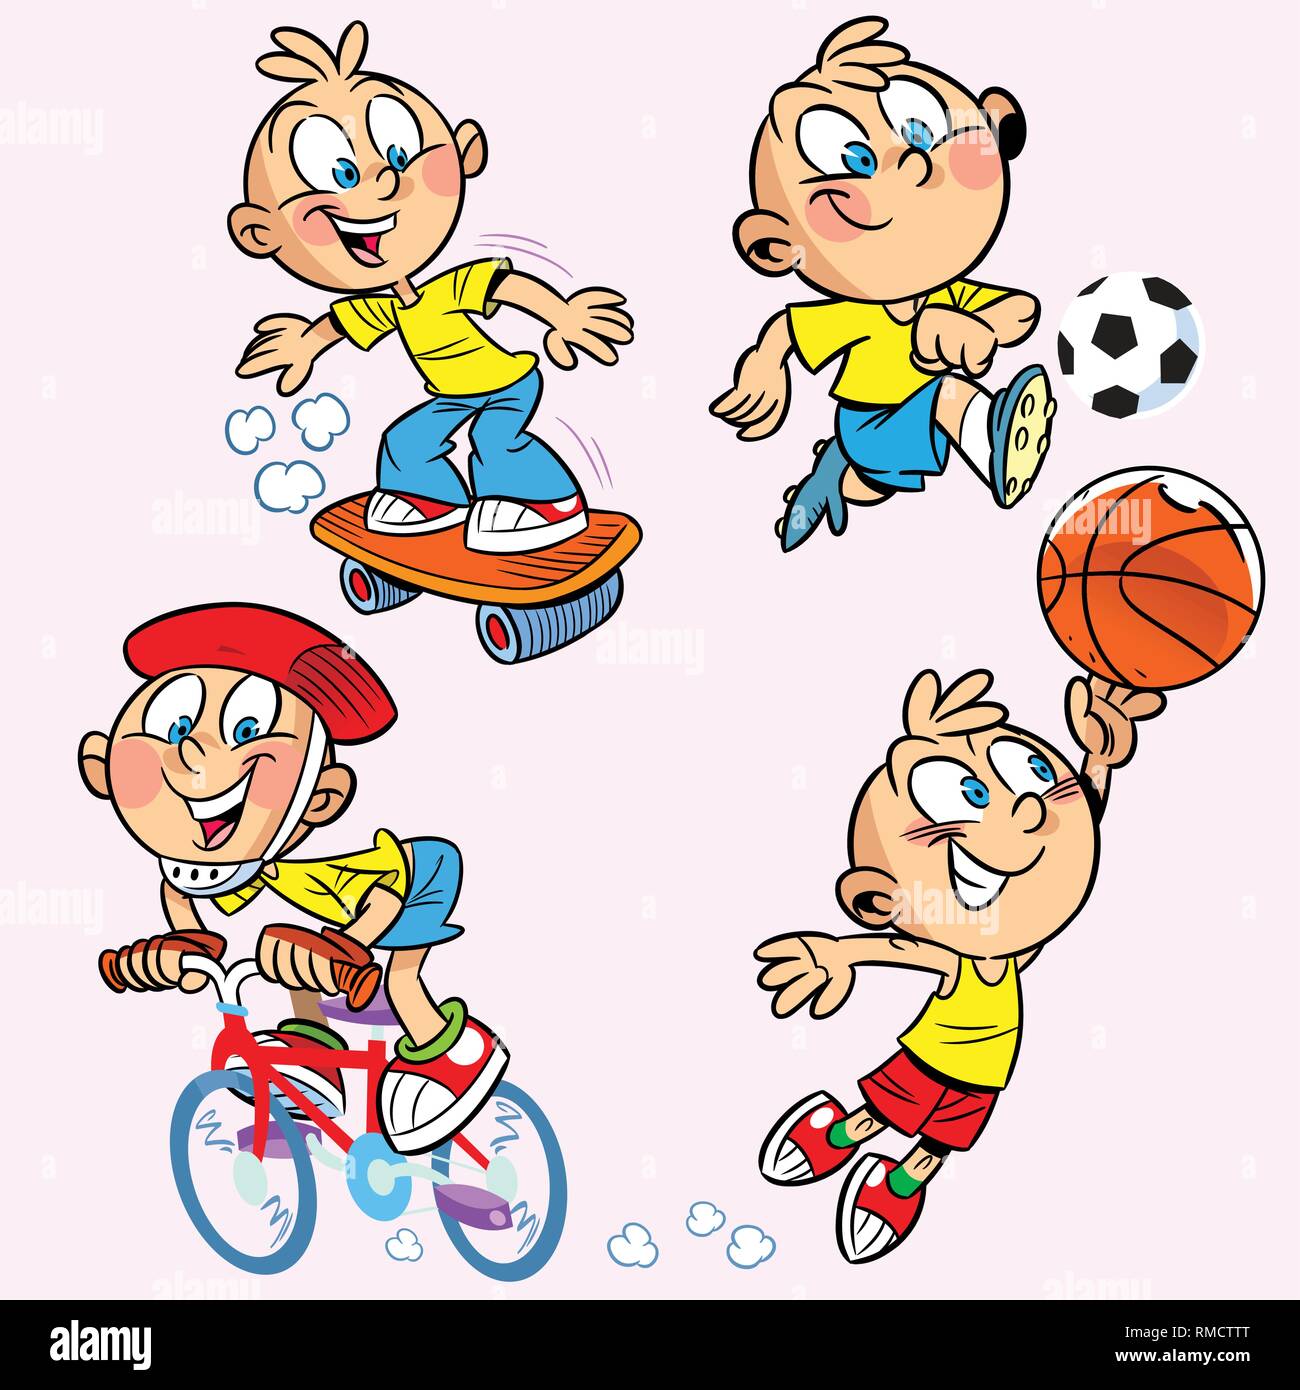 The illustration shows a boy who is engaged in several sports.Illustration done on separate layers, in a cartoon style. Stock Vector